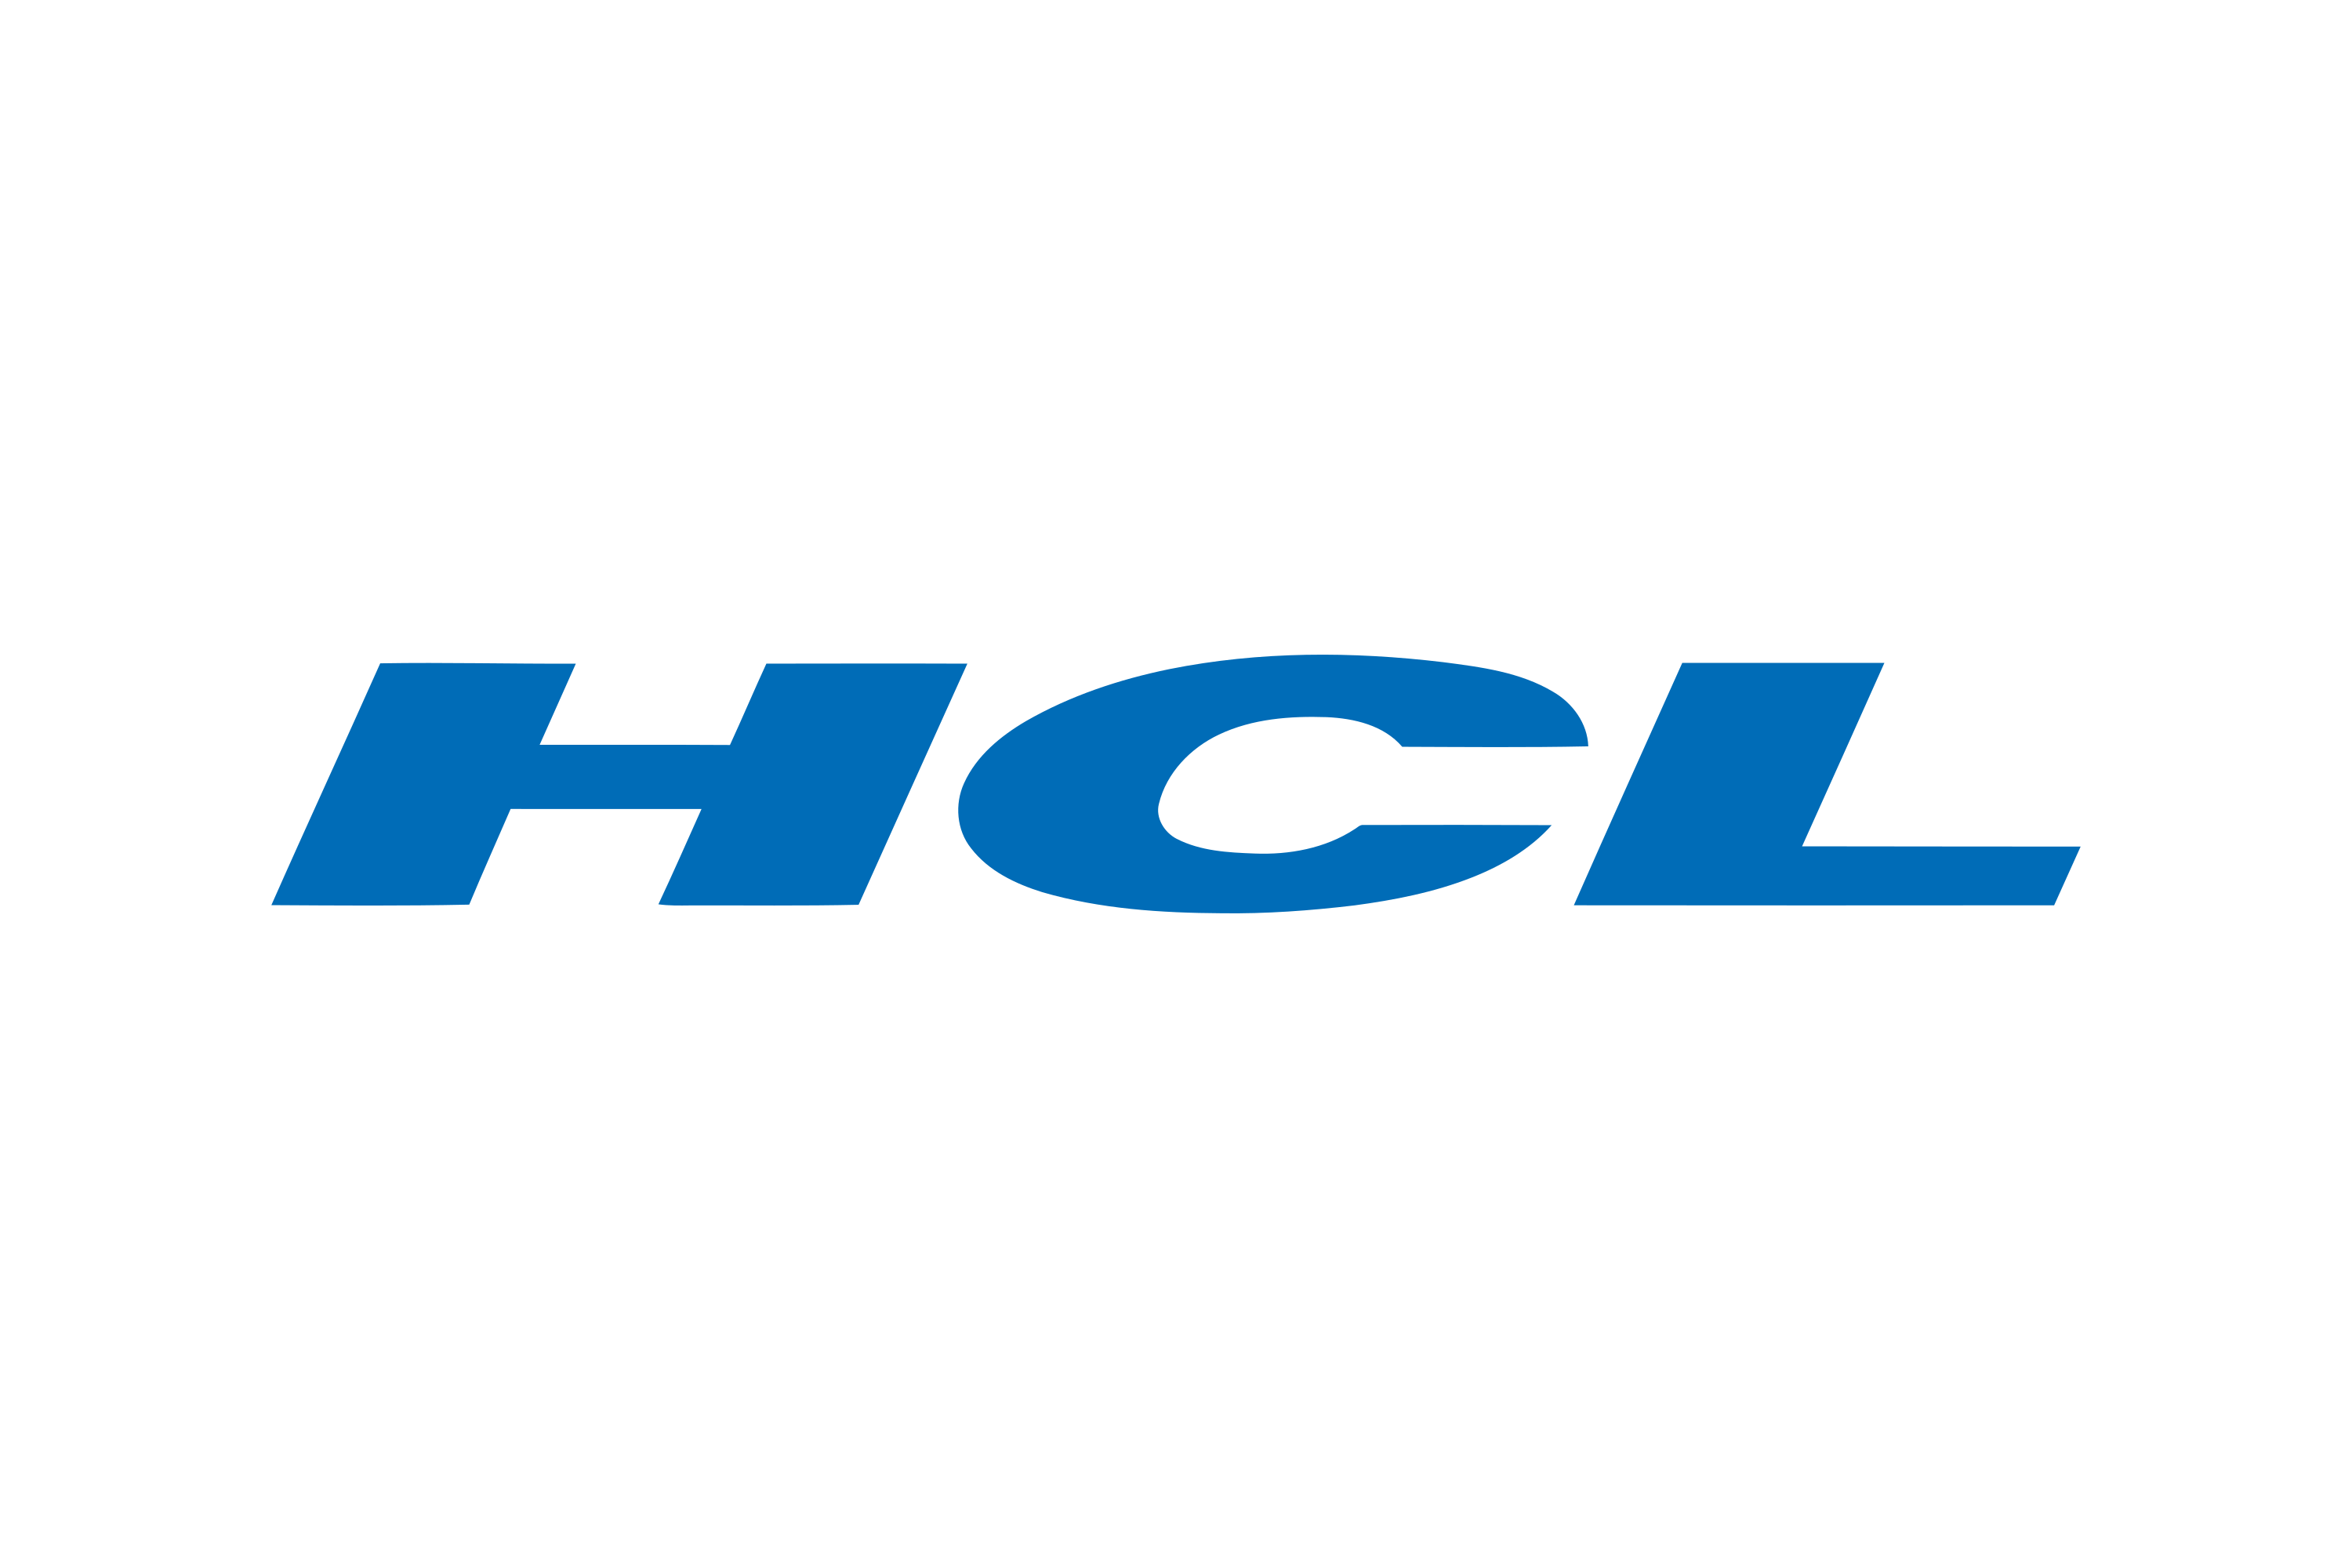 HCL Technologies Stocks Live Updates: HCL Technologies  Closes at Rs 1675.25 with Moderate Trading Volume 